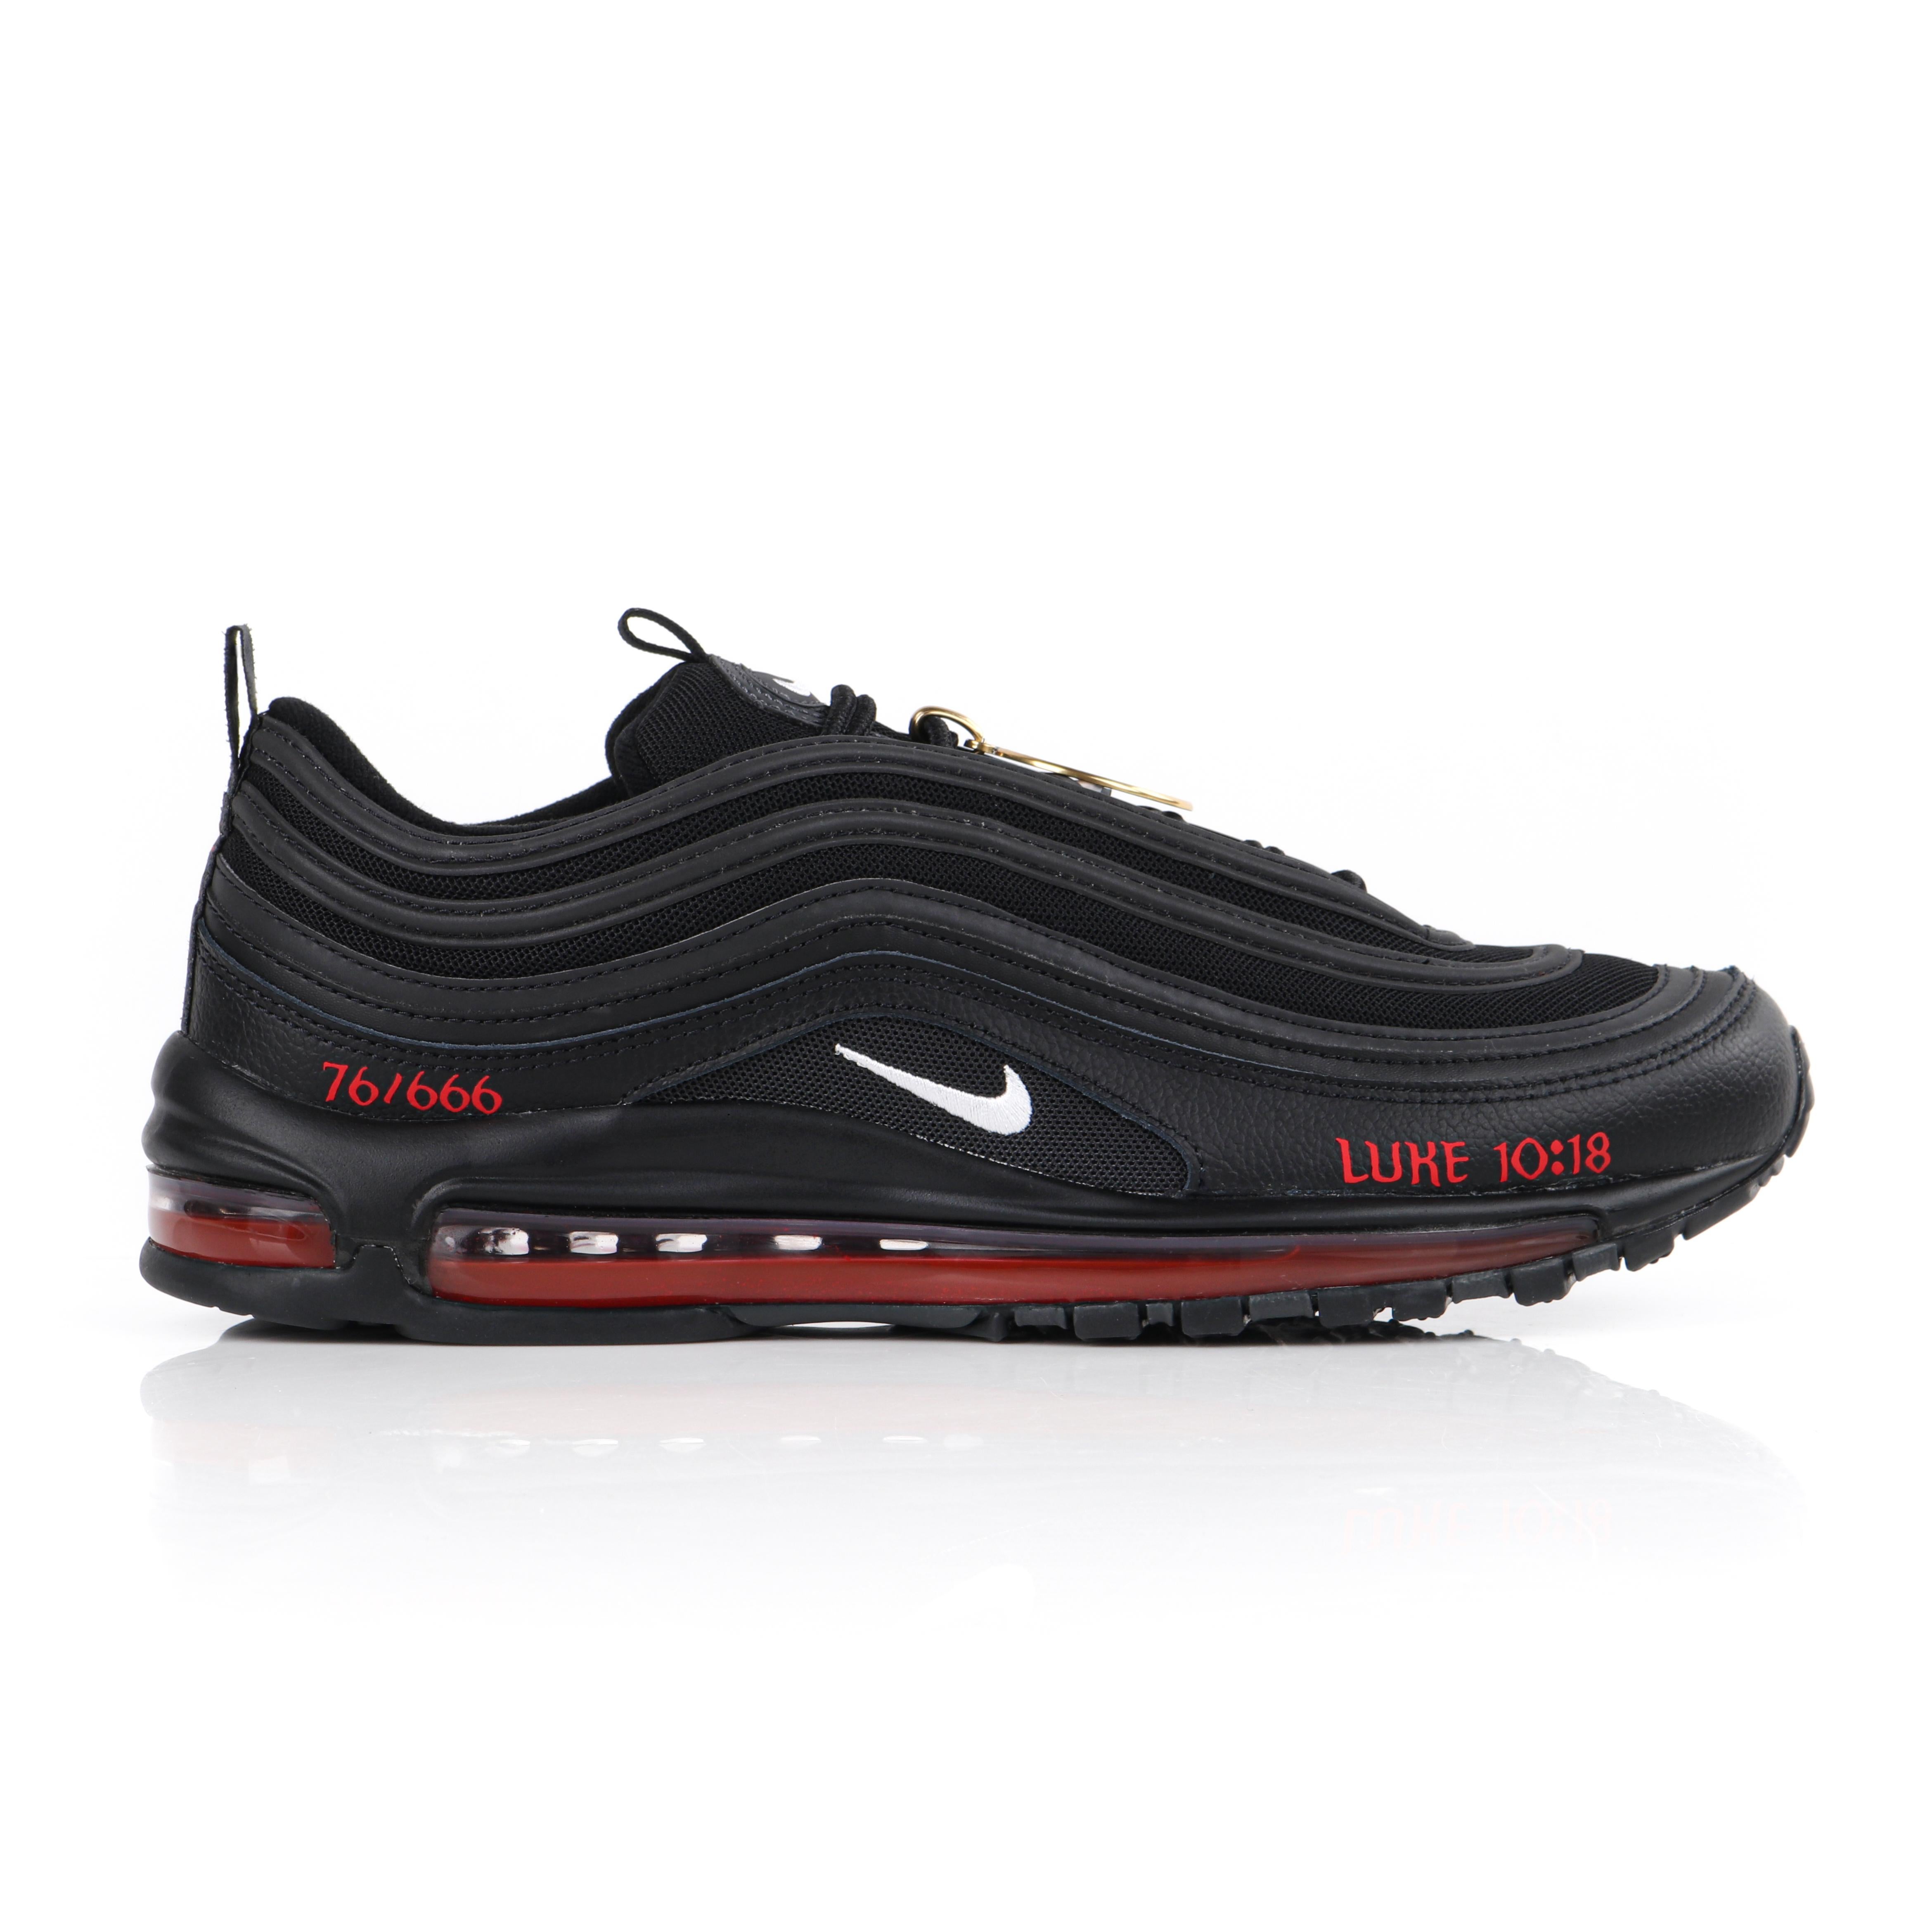 MSCHF and Lil Nas X “Satan” Limited Edition Black Nike Air Max Sneakers 76/ 666 NIB For Sale at 1stDibs | satan shoes nike, nike satan shoes, lil nas x  nike shoes